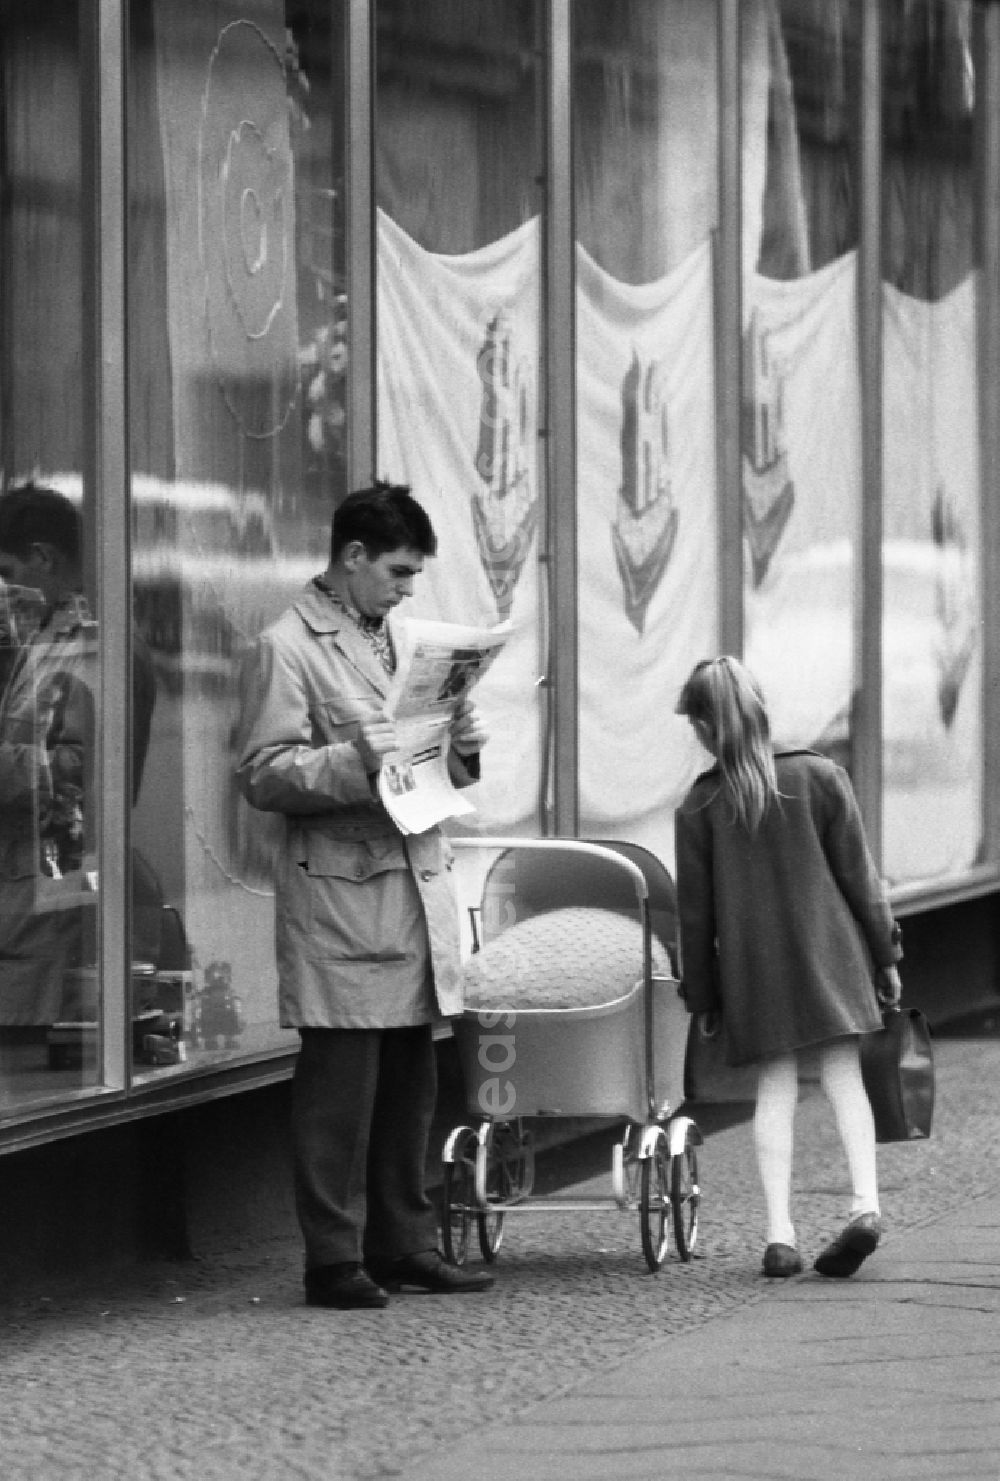 GDR photo archive: Berlin - Girl looks into the stroller of a father reading a newspaper in East Berlin on the territory of the former GDR, German Democratic Republic